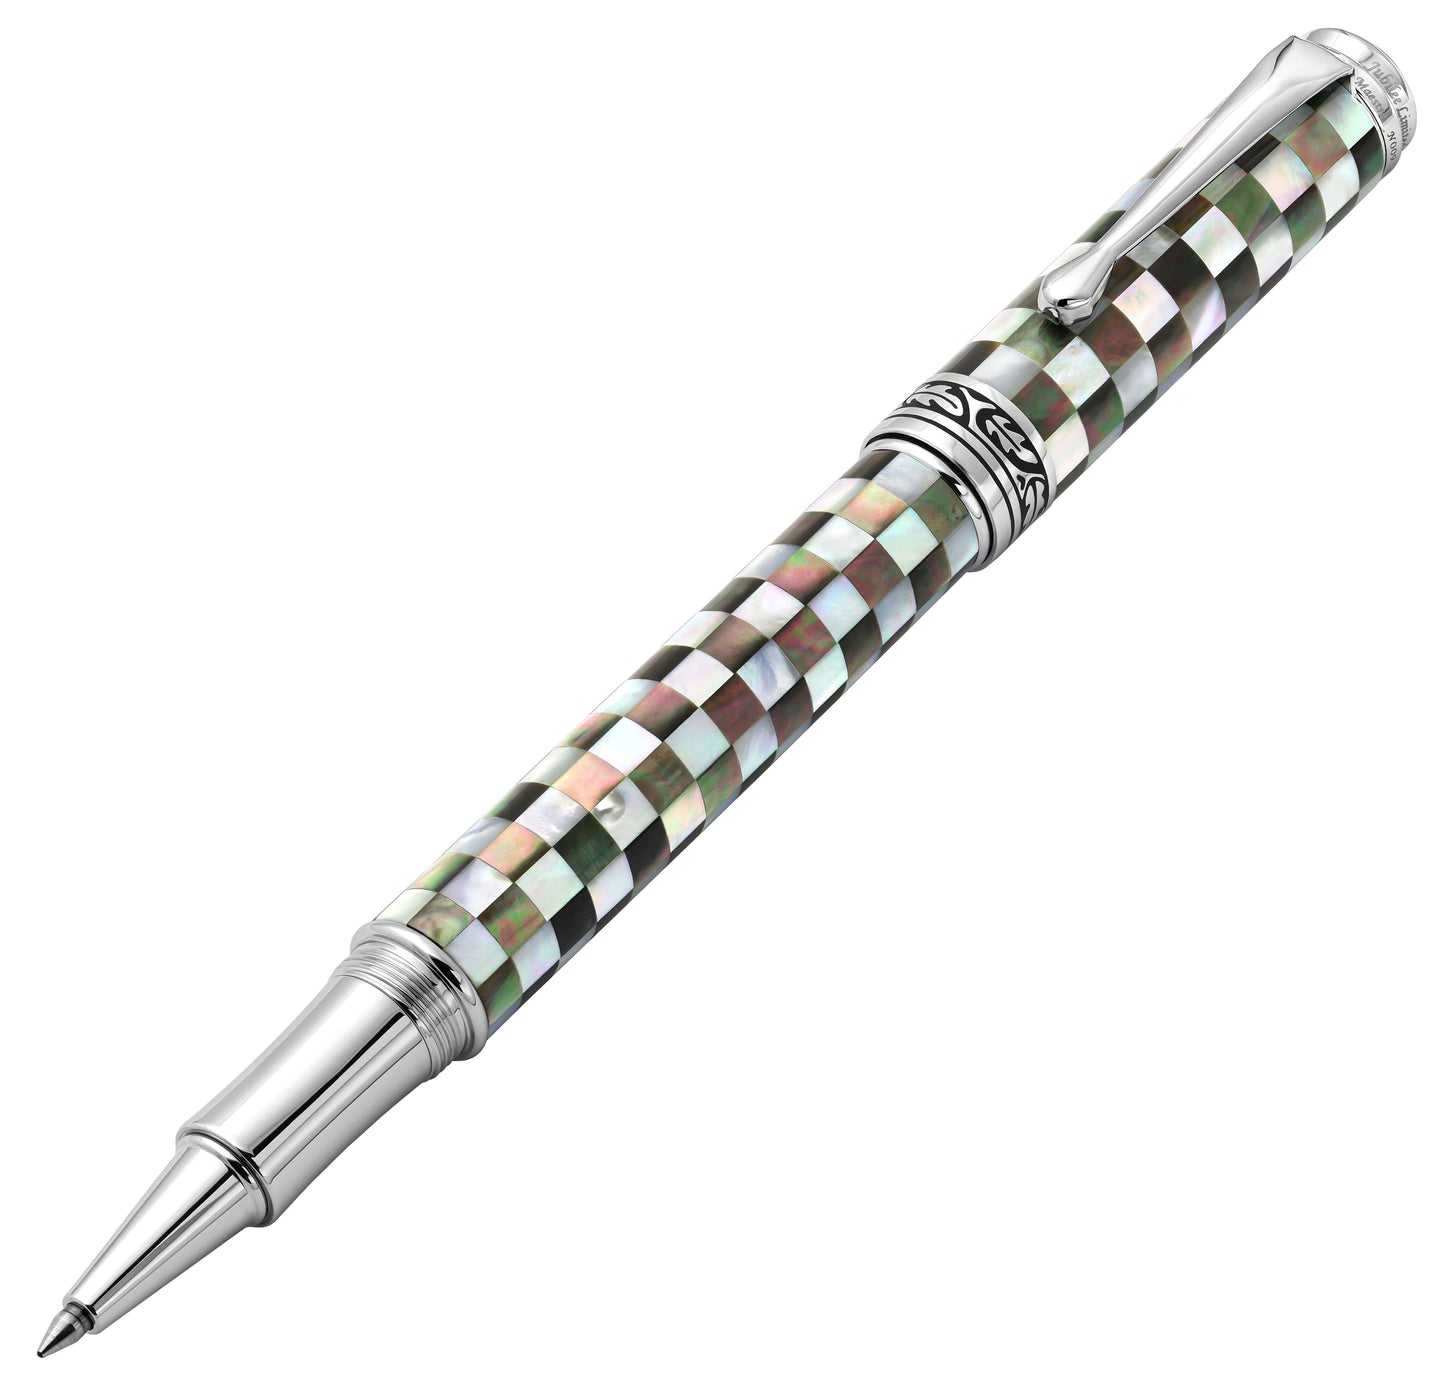 Maestro Jubilee Classic Of The Ocean Rollerball Pen uncapped at an angle